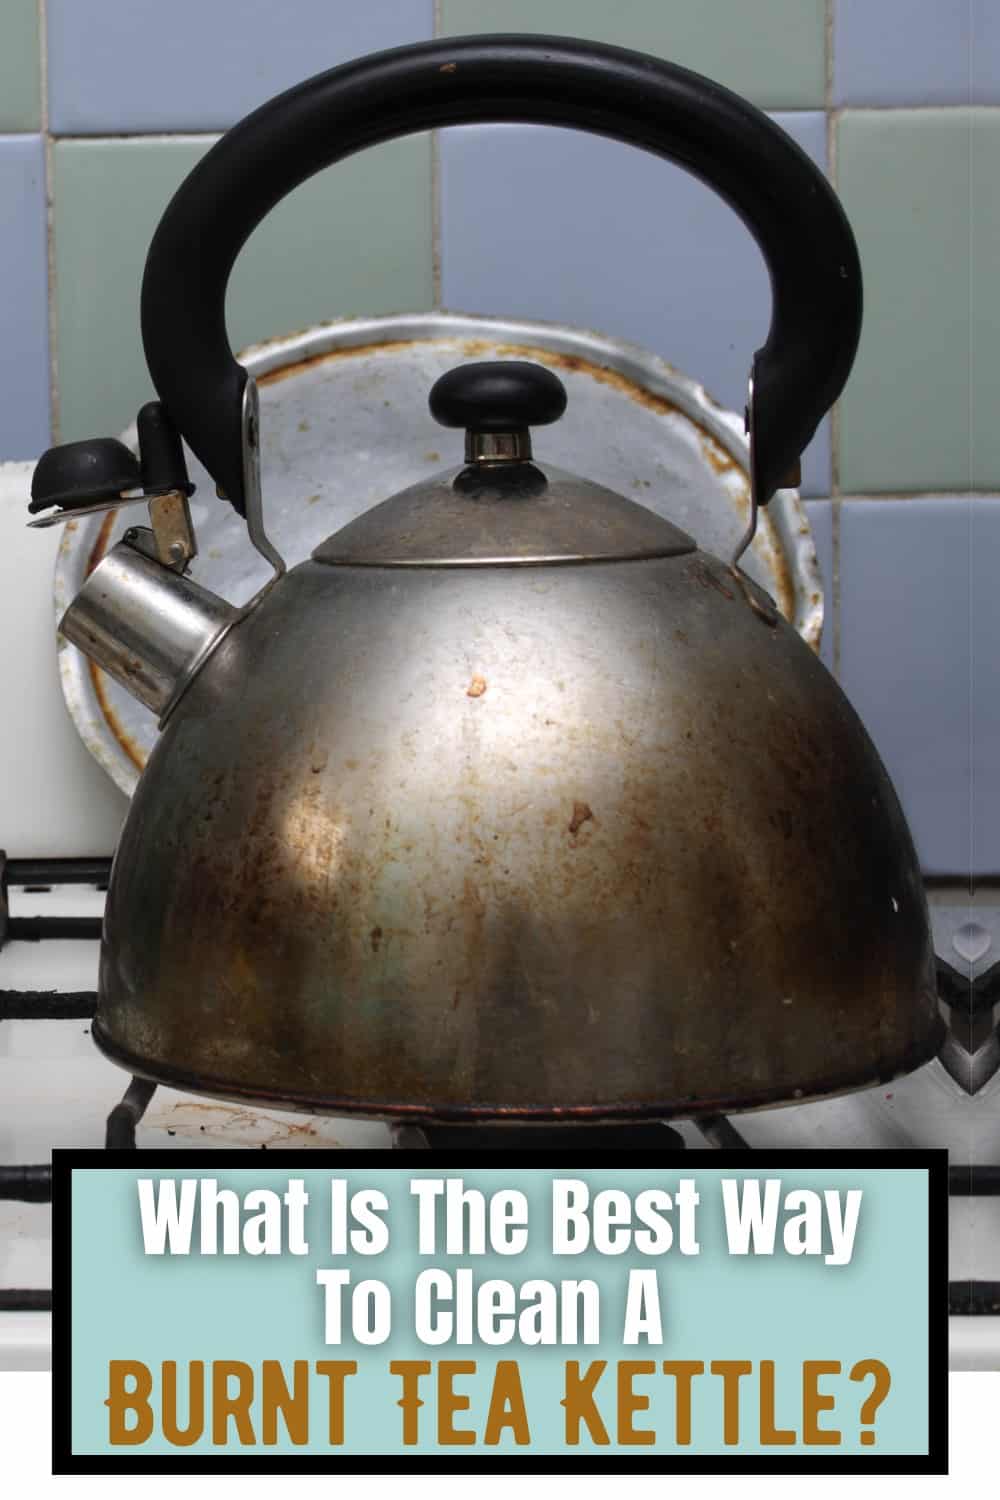 You can clean a burnt kettle with baking soda, and vinegar